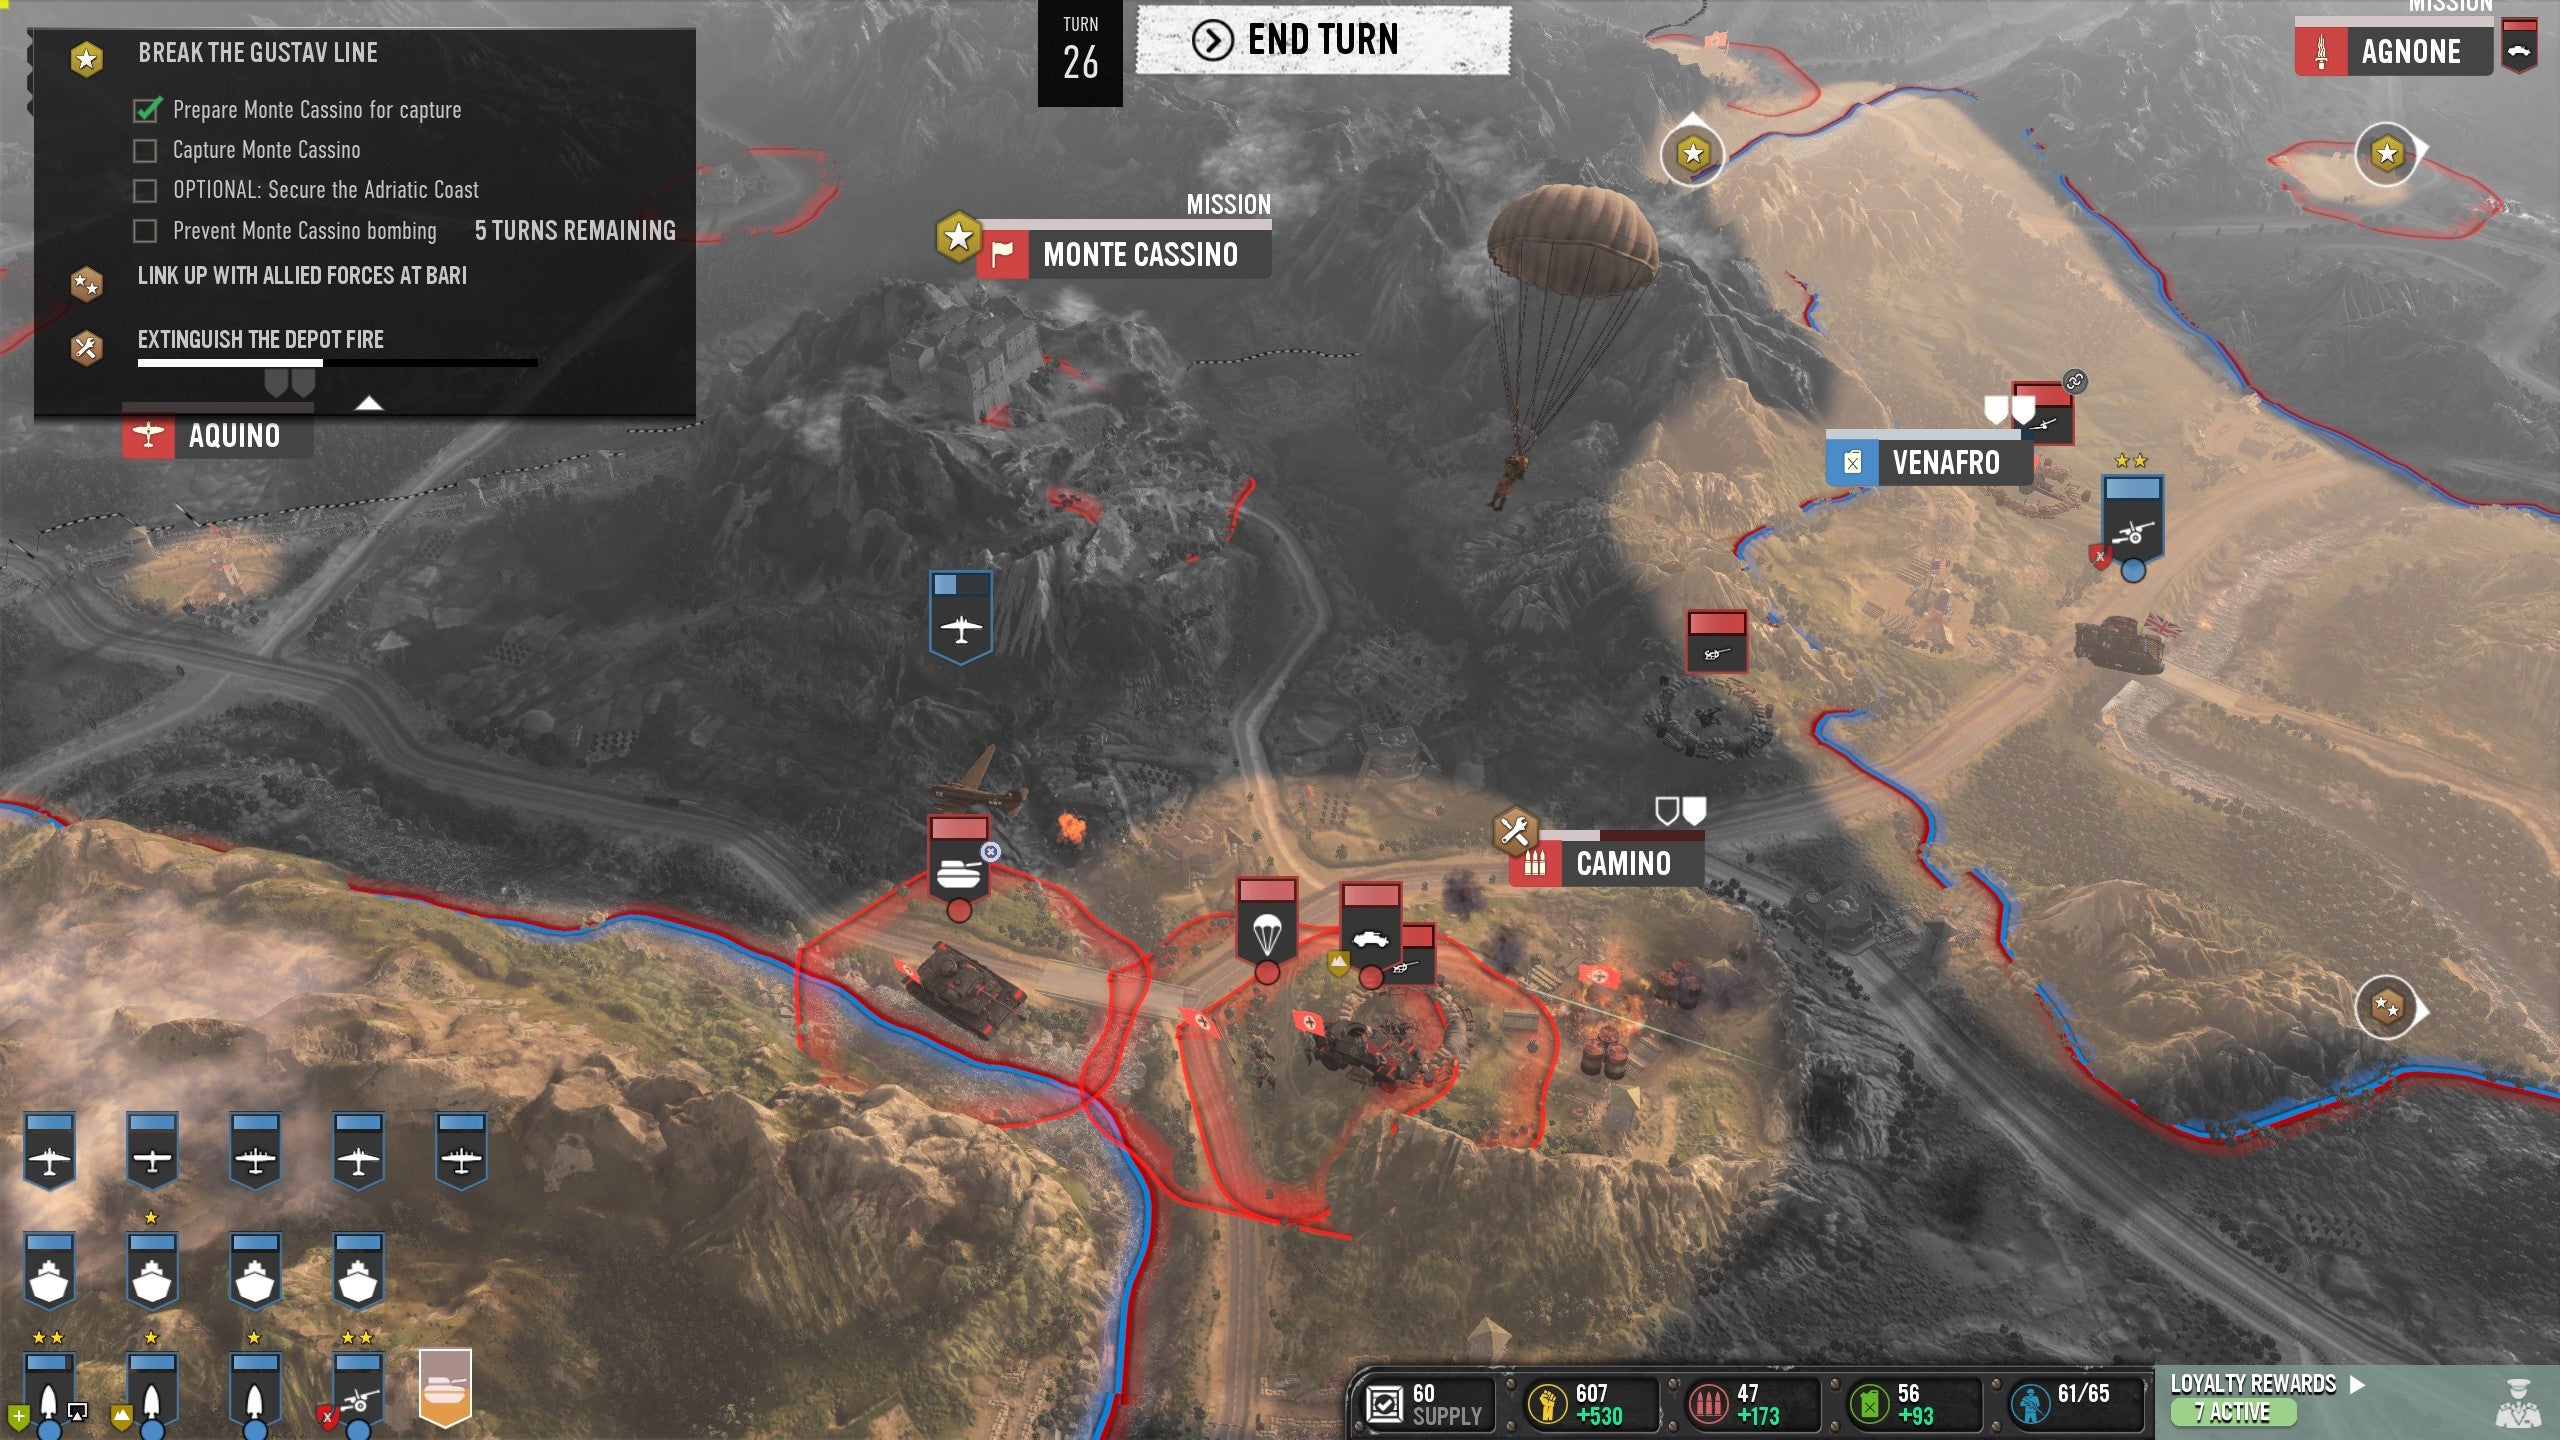 A troop of soldier parachute into Camino in Company Of Heroes 3